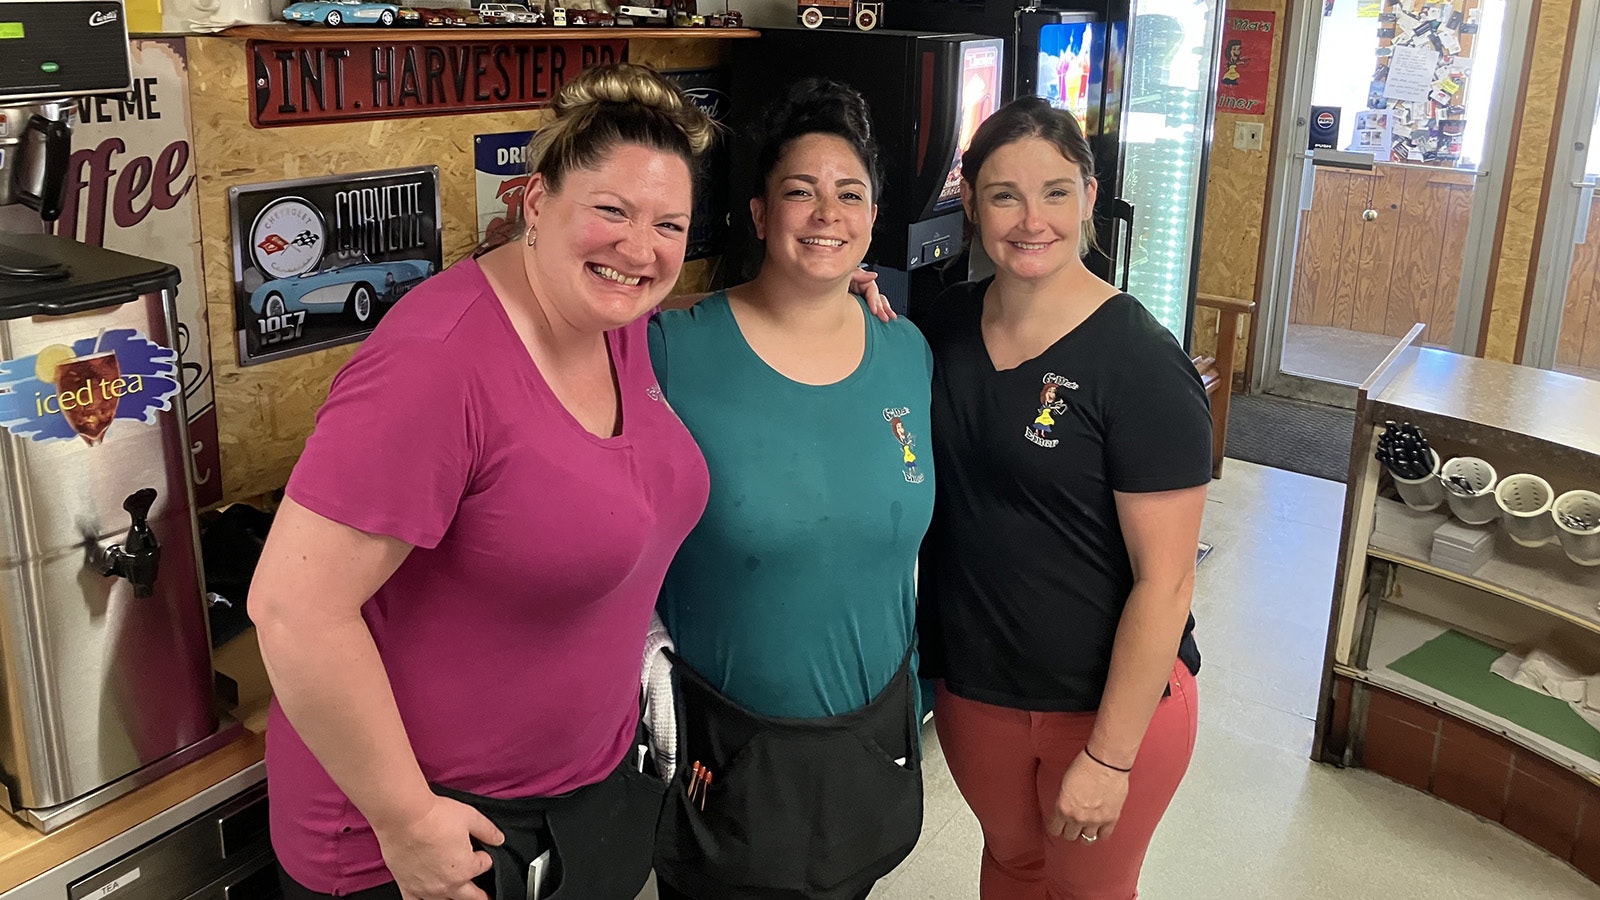 G-Ma’s servers say they like to keep track of their customers and create a fun dining experience. Shown from left are Sarah Schicketanz, Erika Condelario, and Crystal Collier.